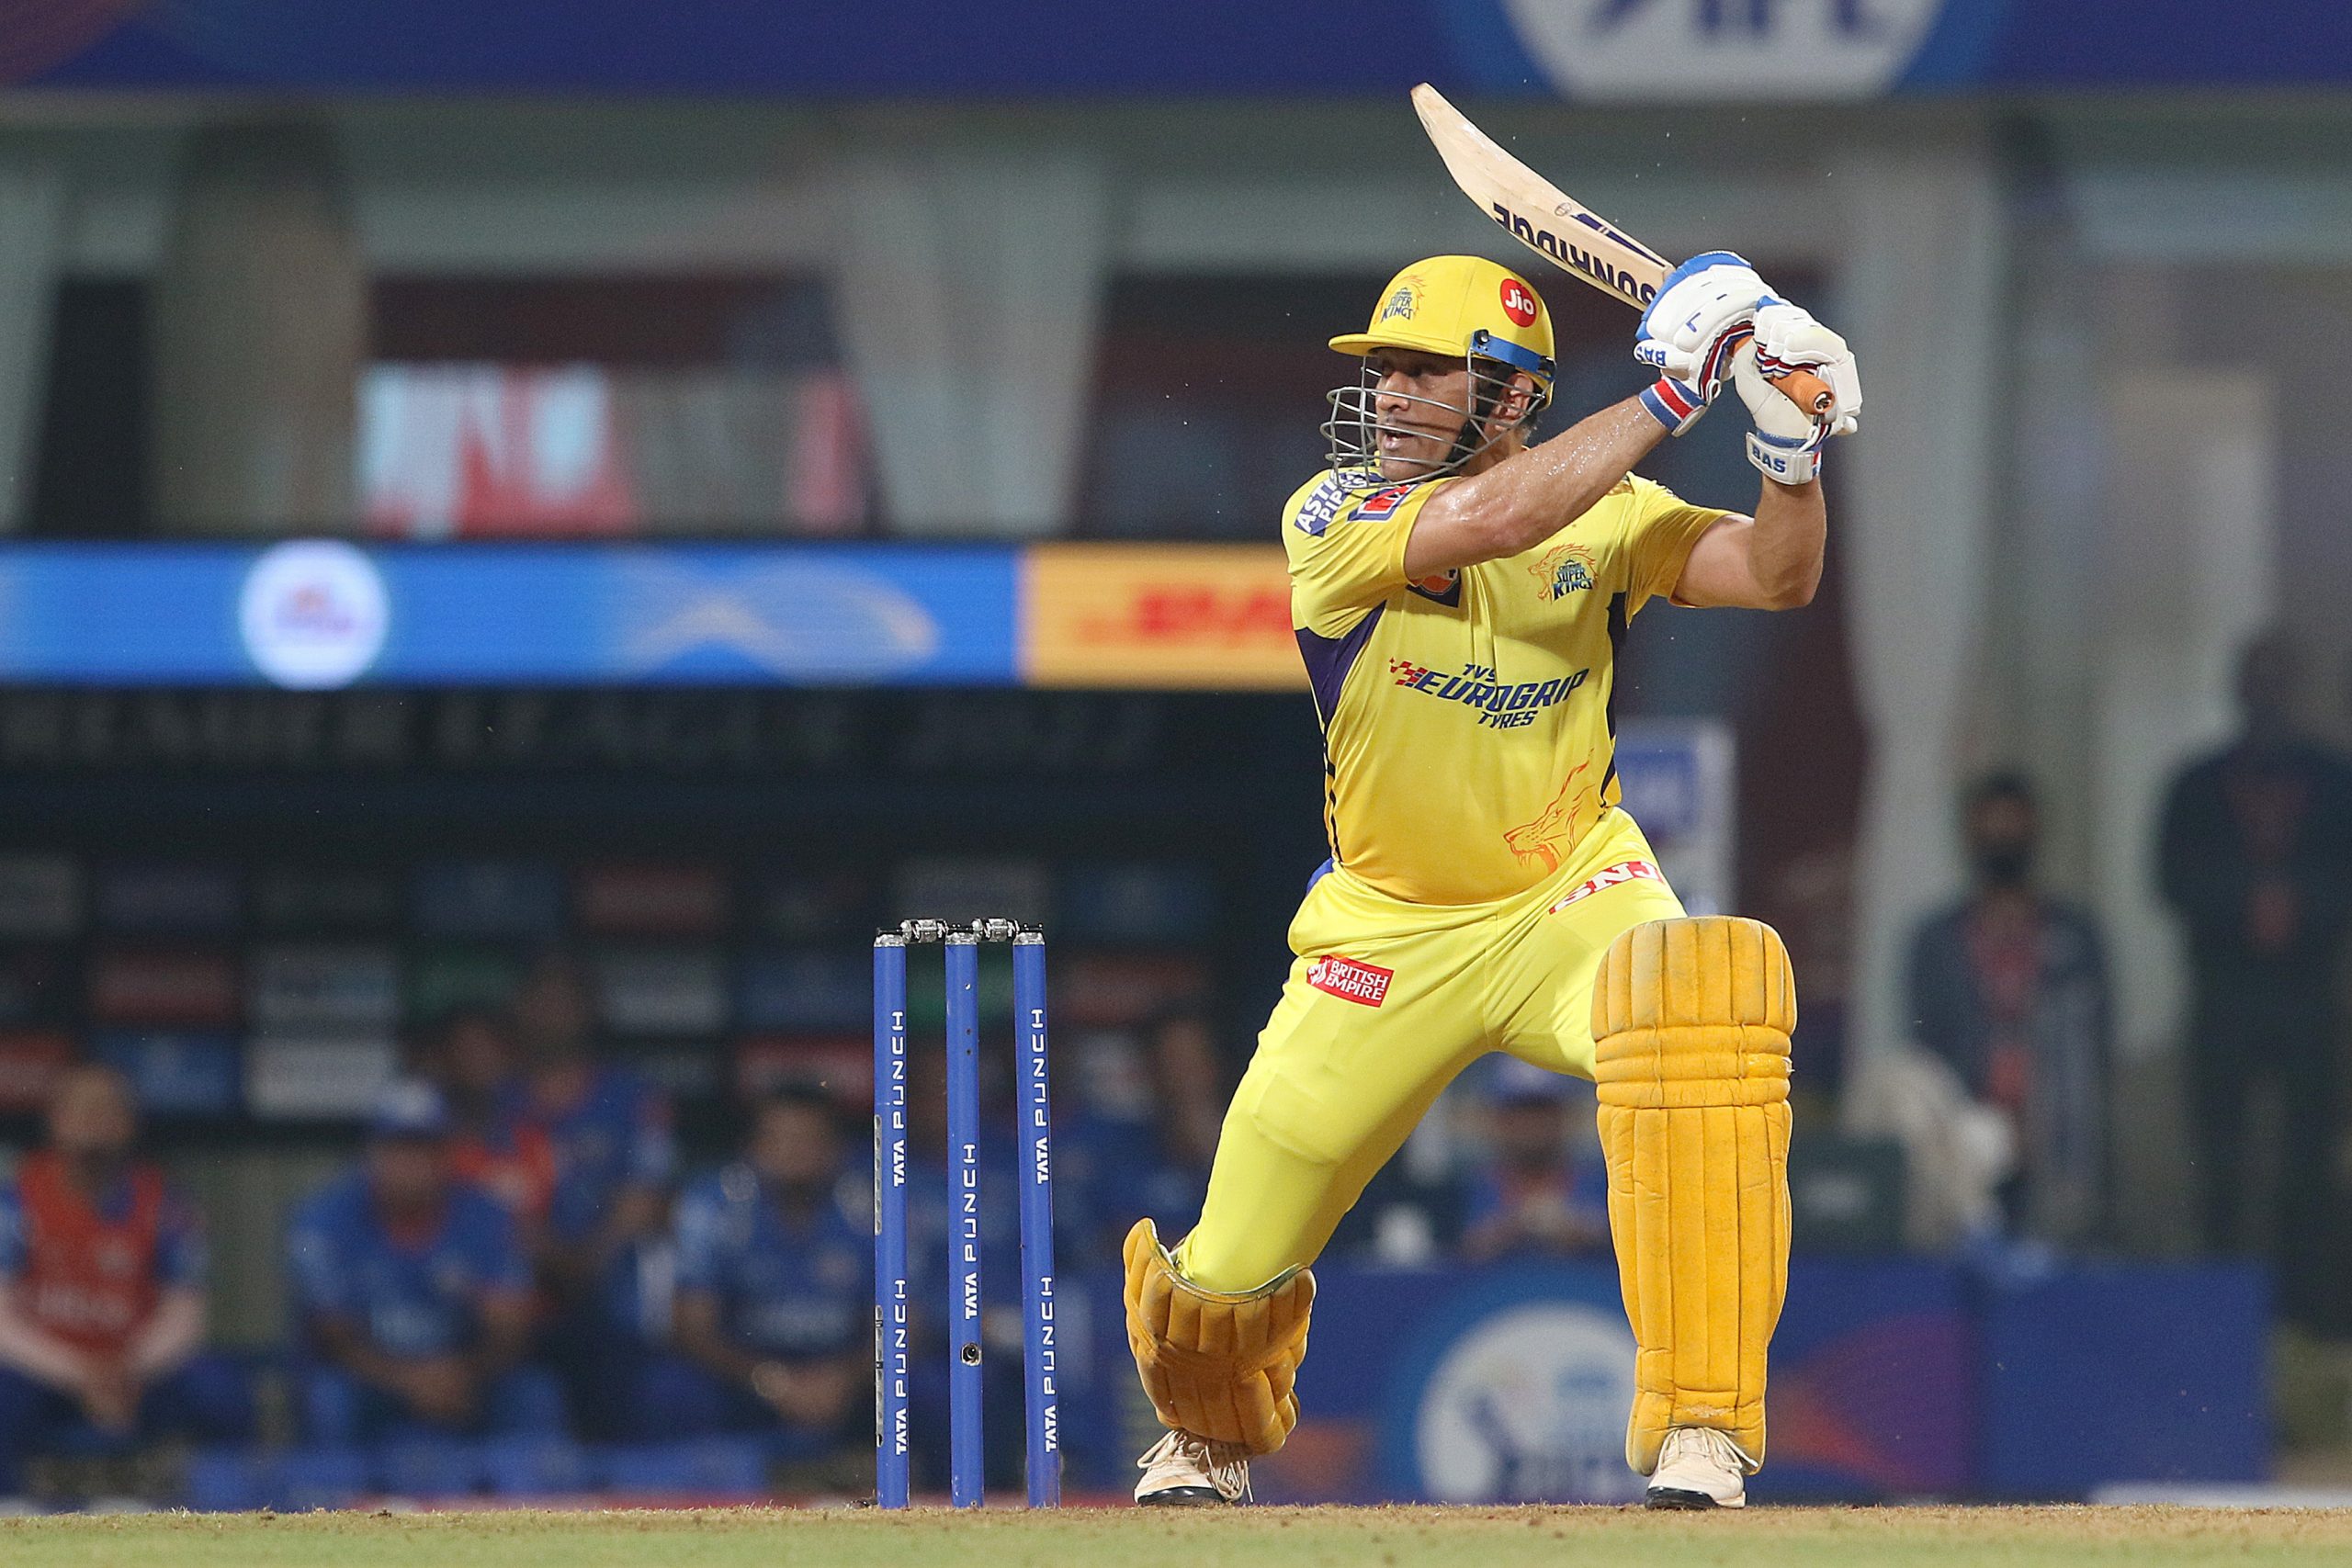 IPL 2022: Dhoni becomes 2nd cricketer after Kohli to play 200 matches for a single franchise